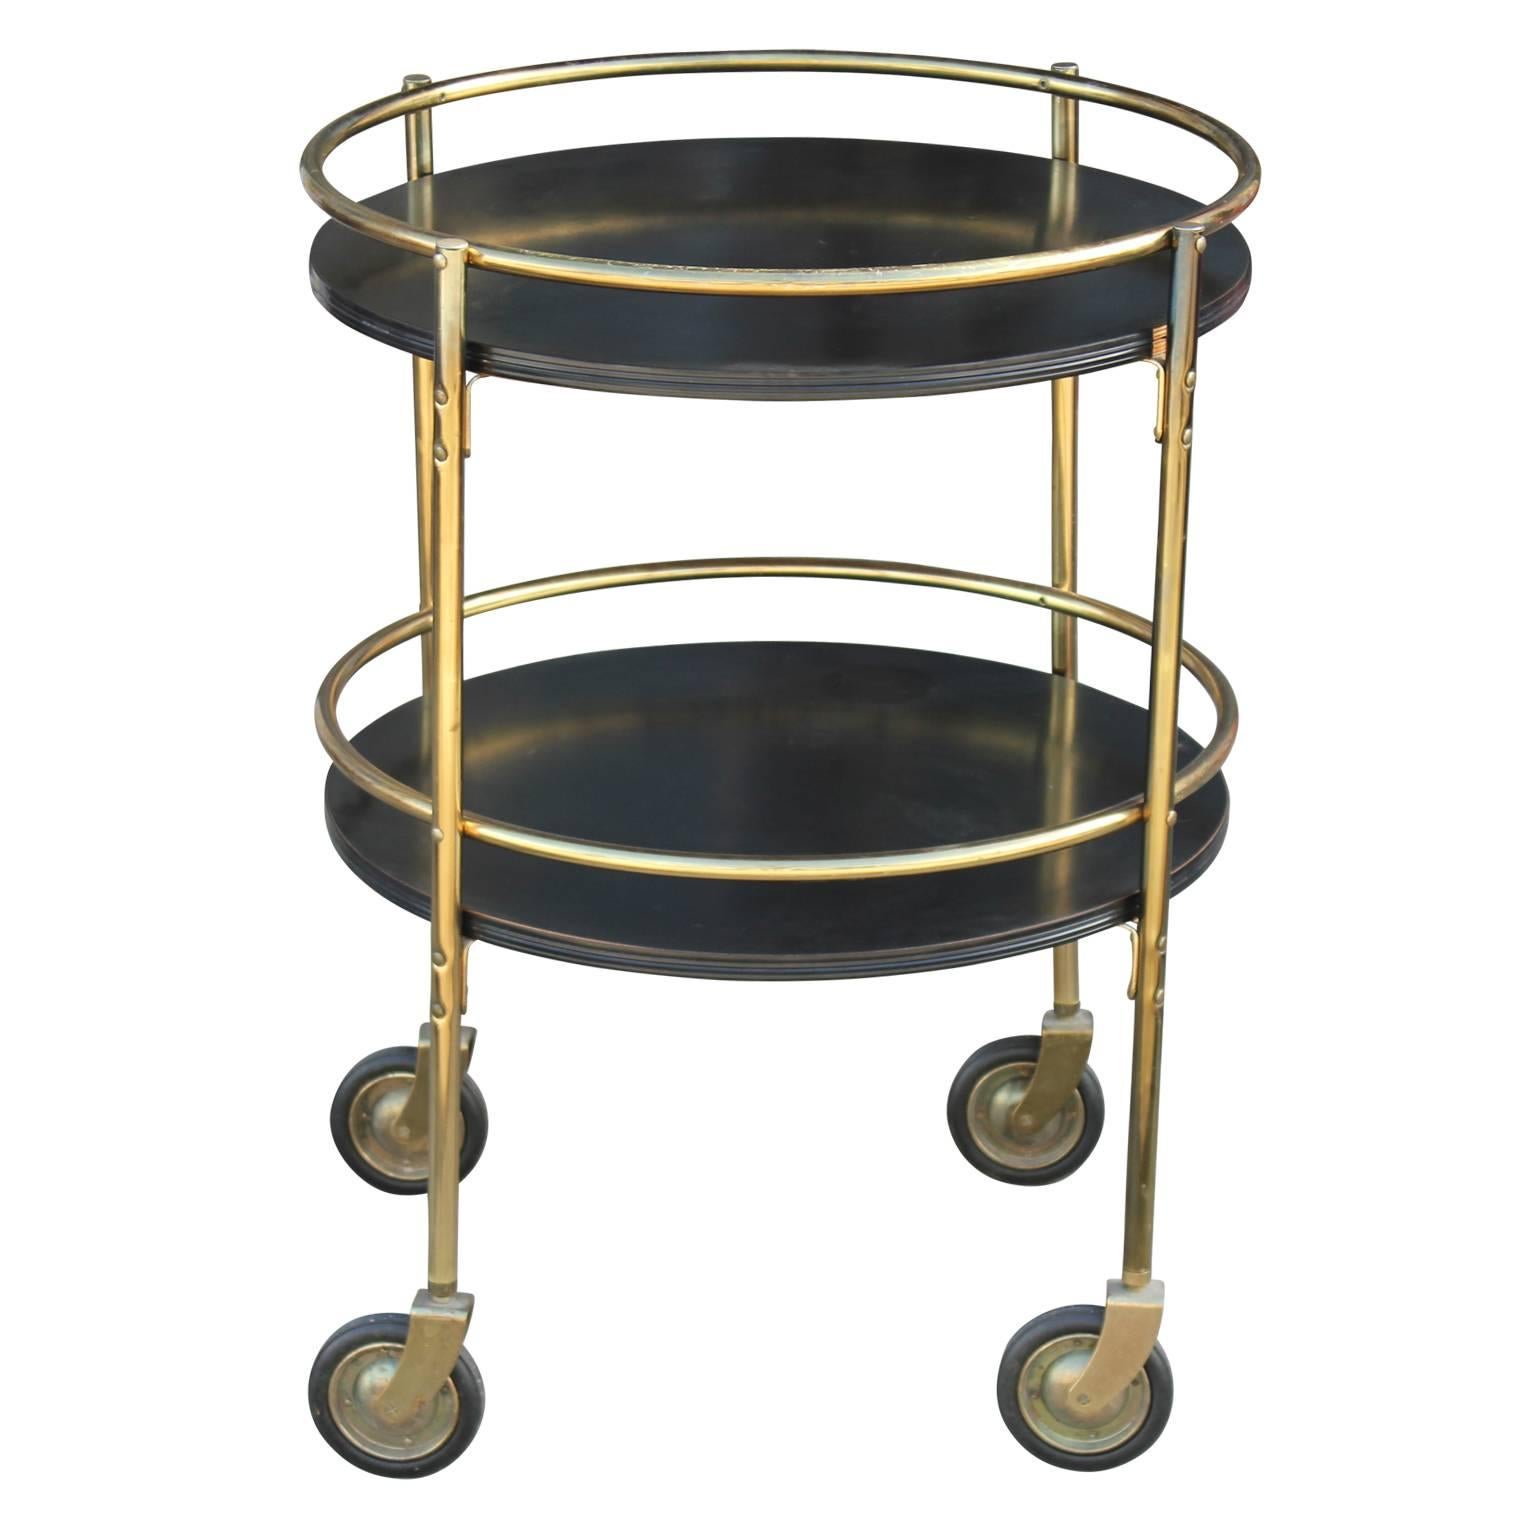 Modern round two tiered bar cart in a lovely black with a brass structure with a perfect patina. In the style Kem Webber. The contrast between the black and brass provide a dynamic. Gorgeous and functional. 